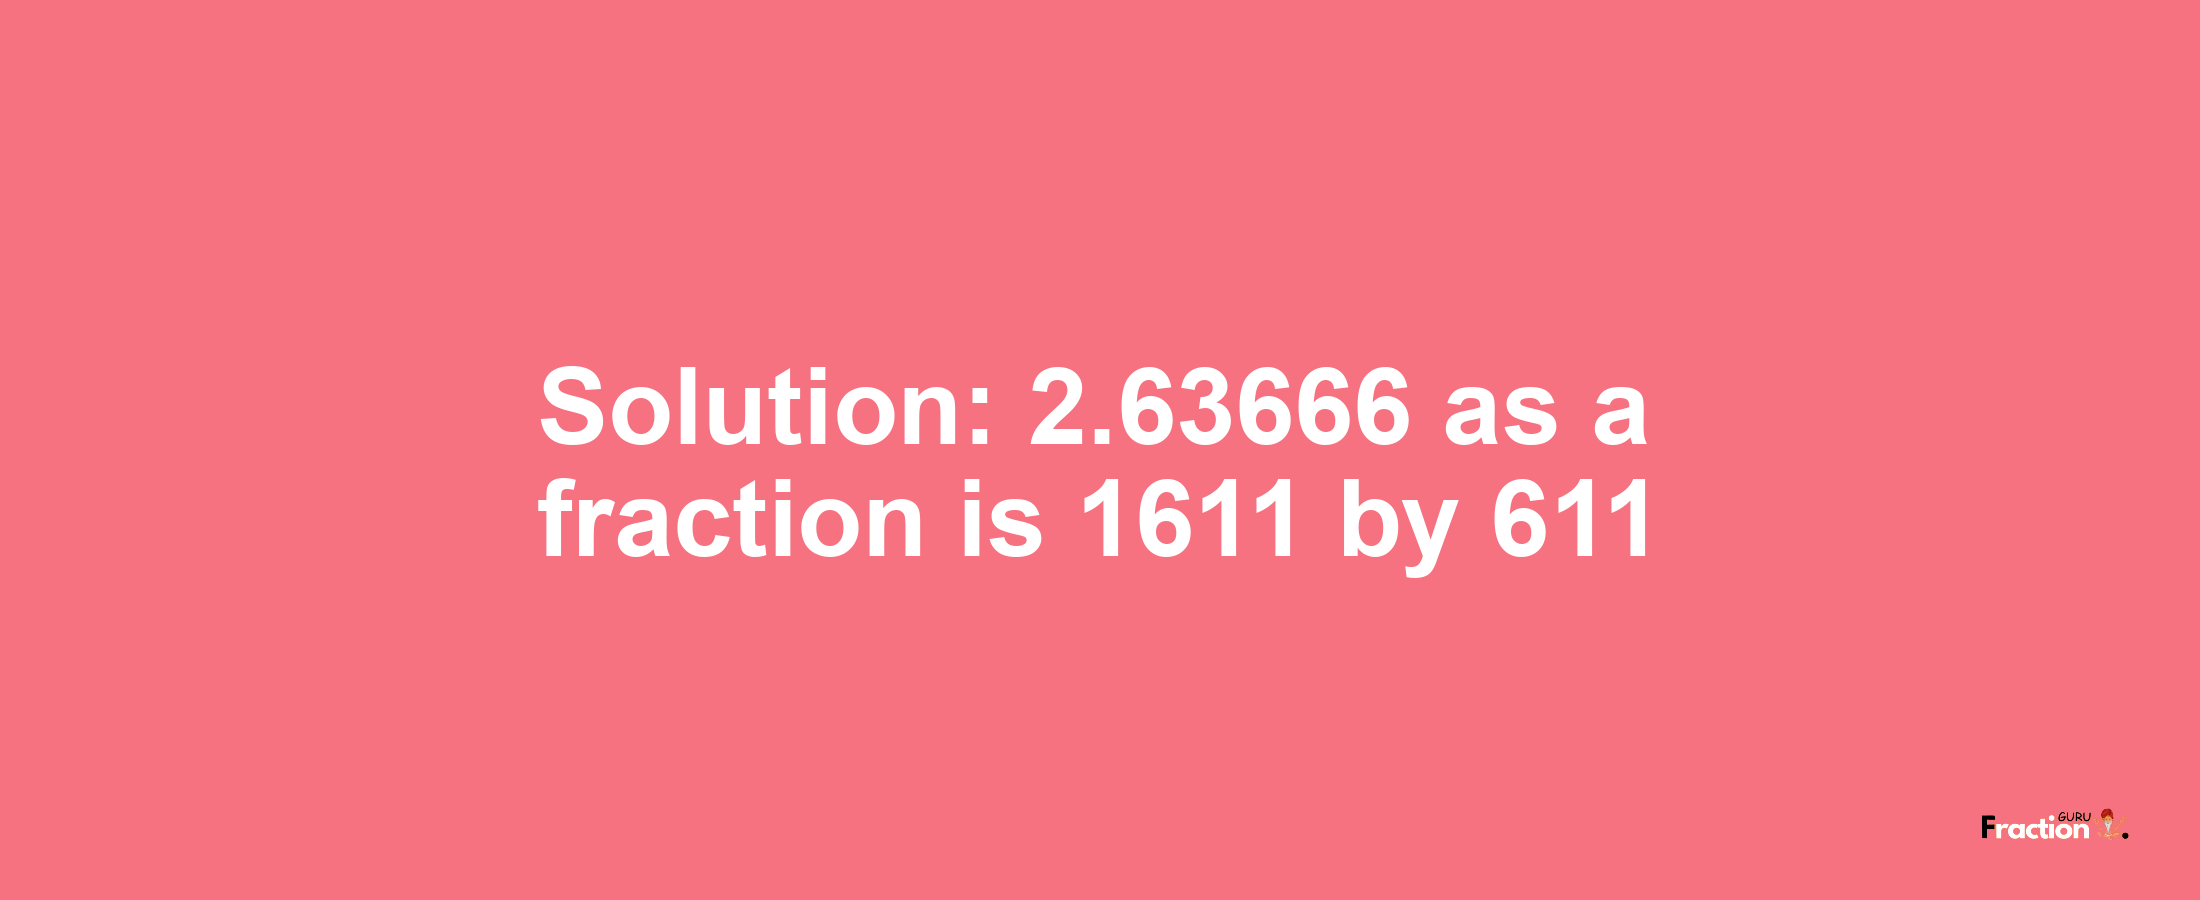 Solution:2.63666 as a fraction is 1611/611